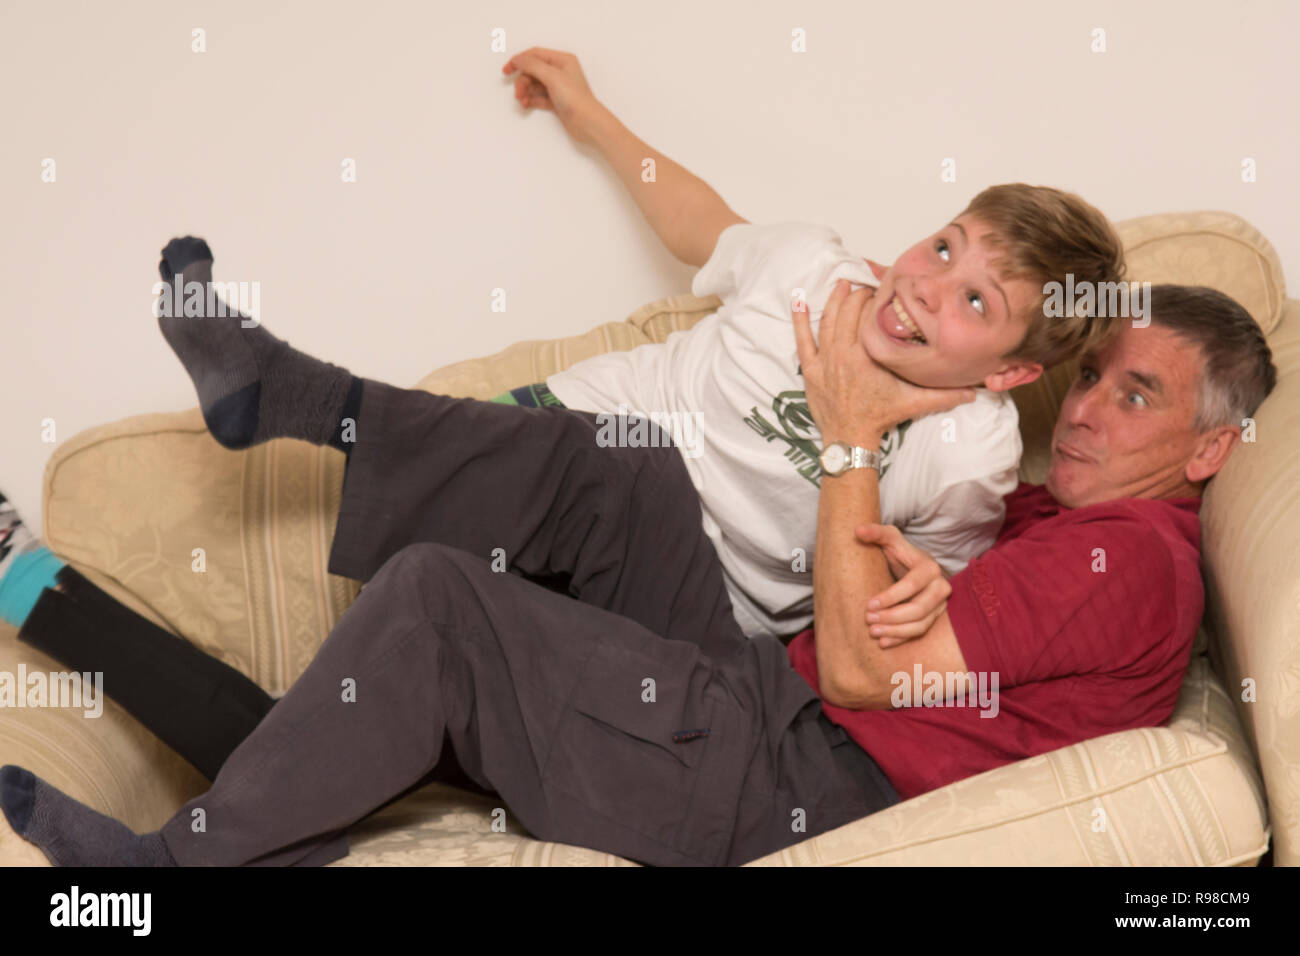 grandfather or father fighting, play-fighting, wrestling, playing rough, with son or grandson, youth, twelve-years-old,  on sofa settee, having fun. Stock Photo